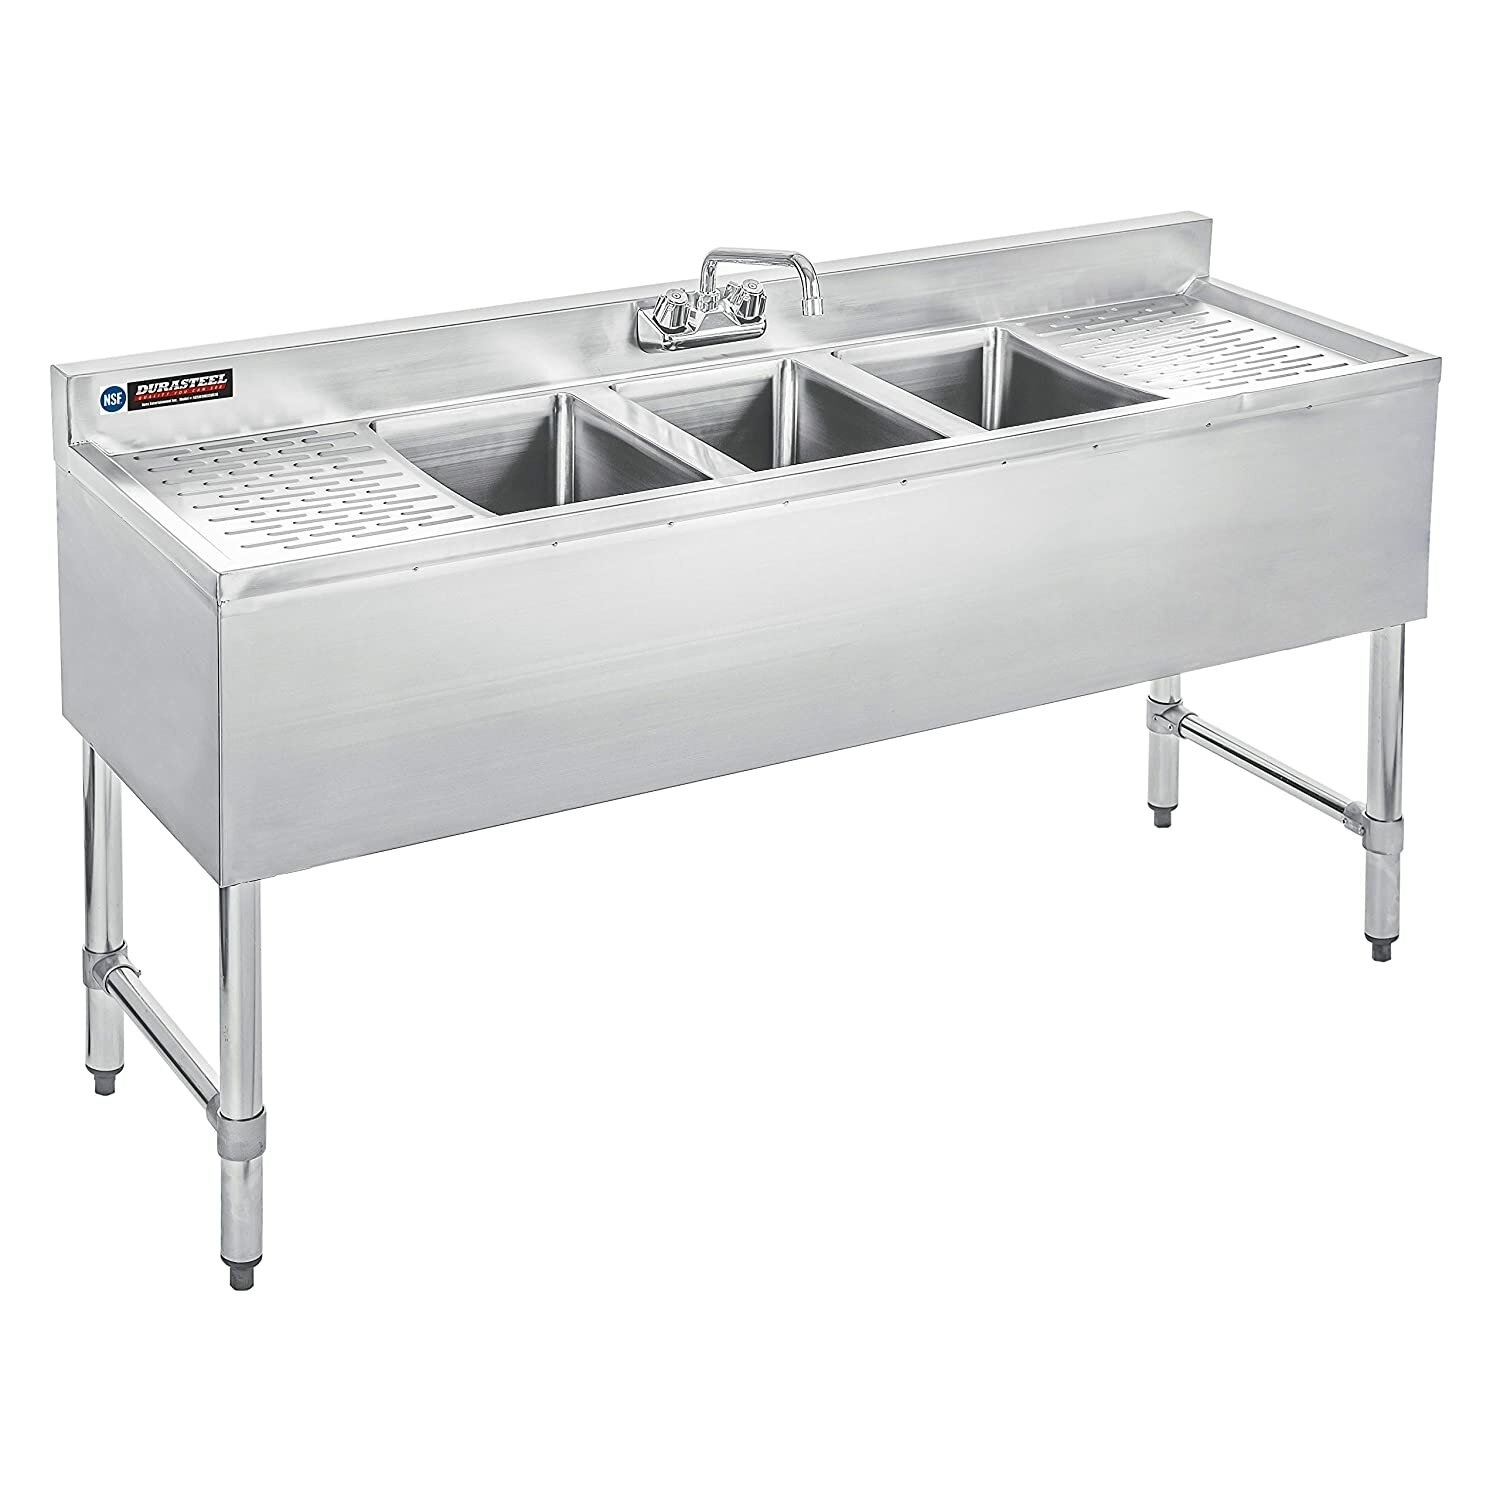 https://visualhunt.com/photos/23/triple-bowl-commercial-bar-sink-w-double-drainboards-10-x-14-x-10-bowl-size-nsf-certified.jpg